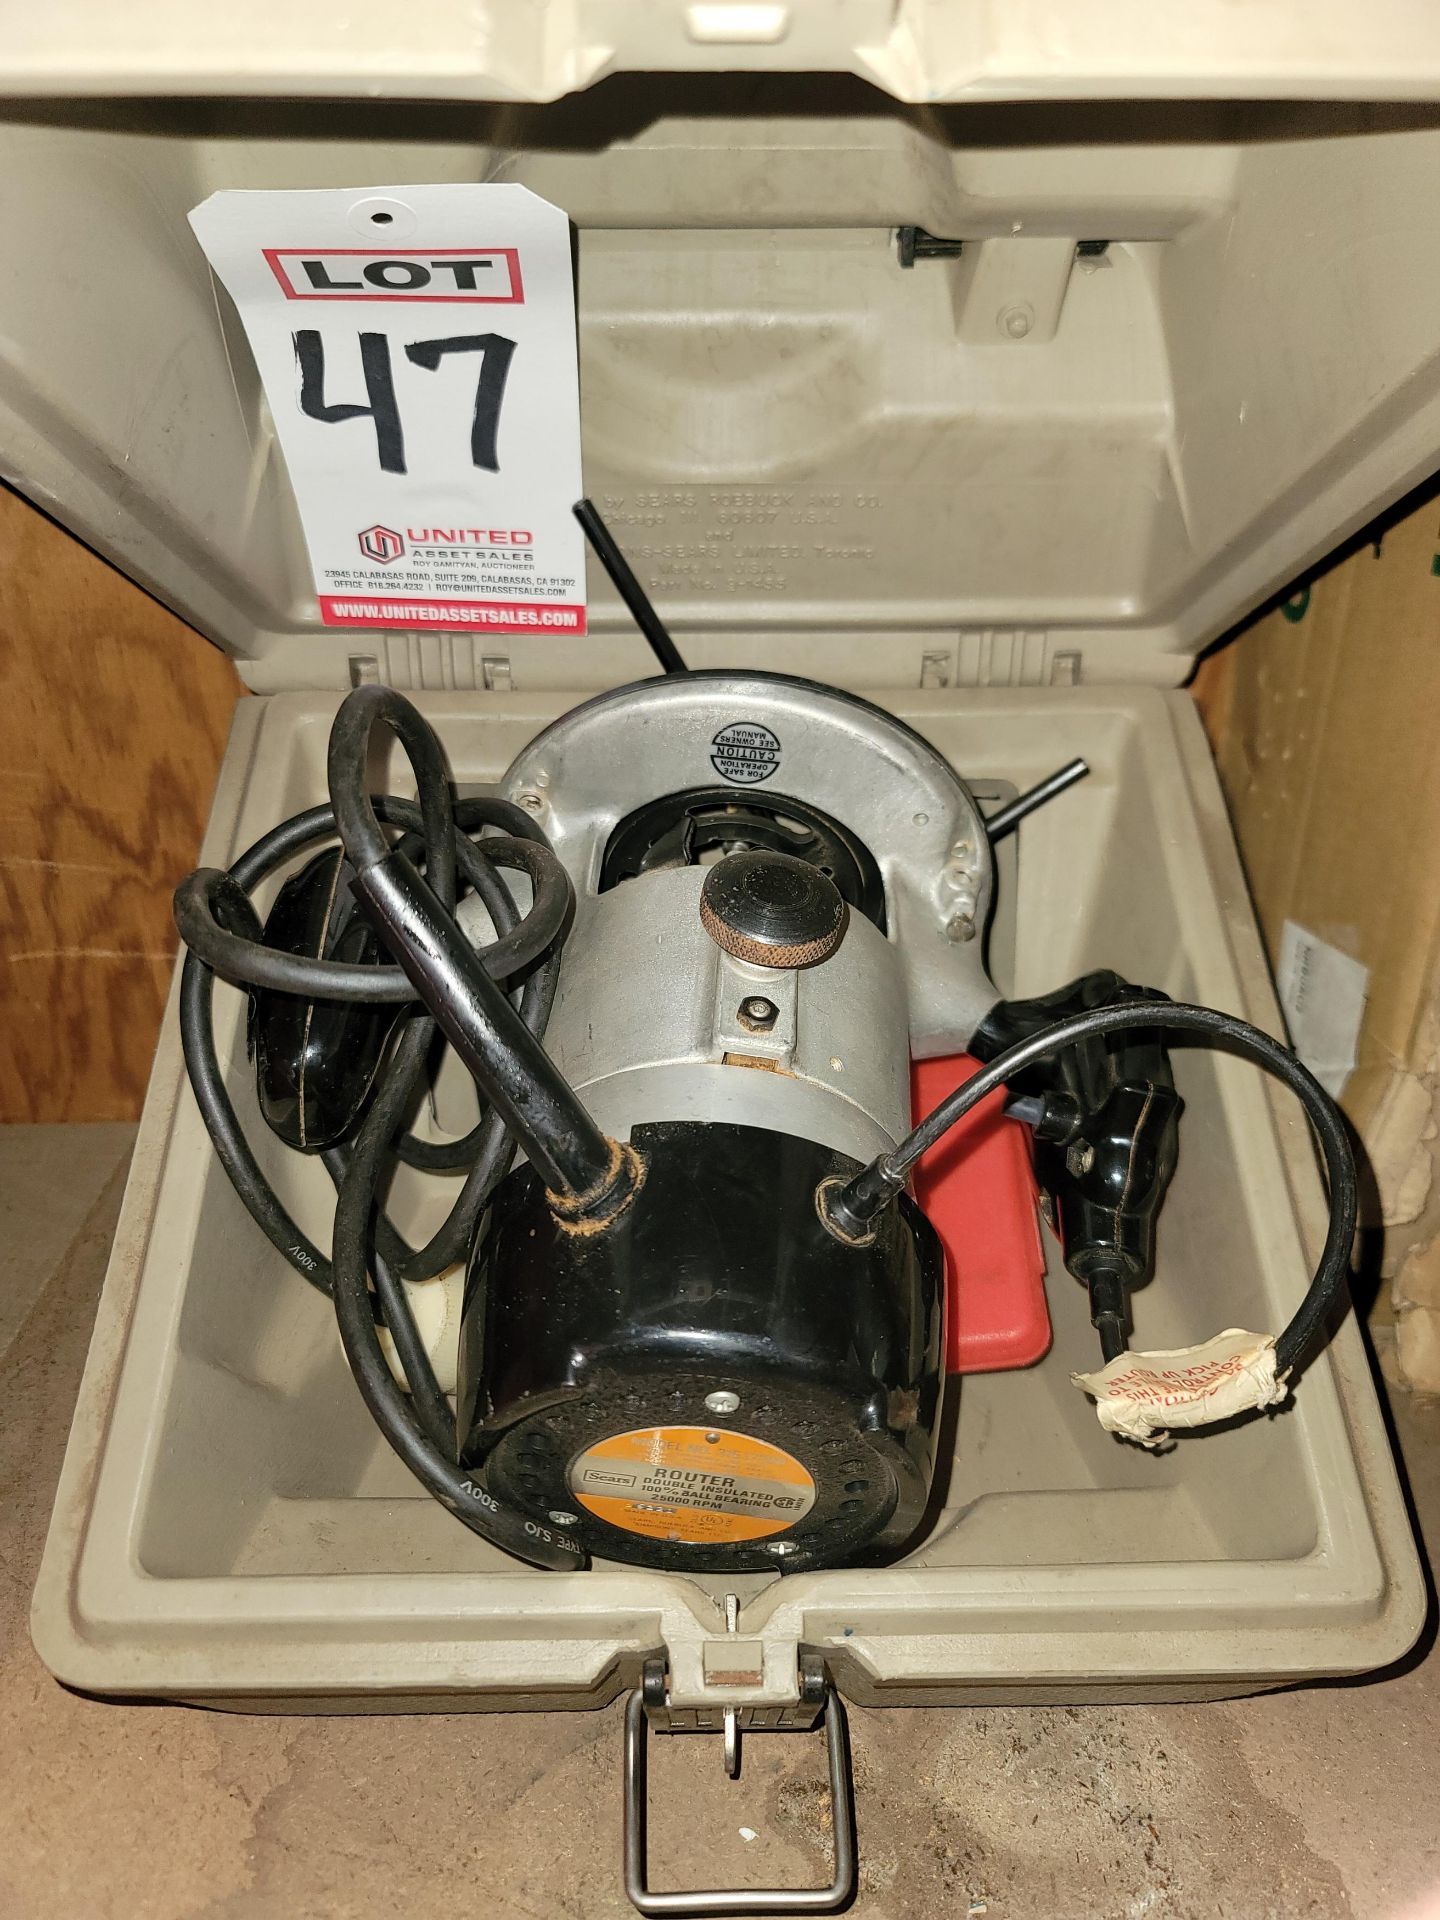 SEARS CRAFTSMAN COMMERCIAL ROUTER, MODEL 315.17380, 25,000 RPM, W/ CASE